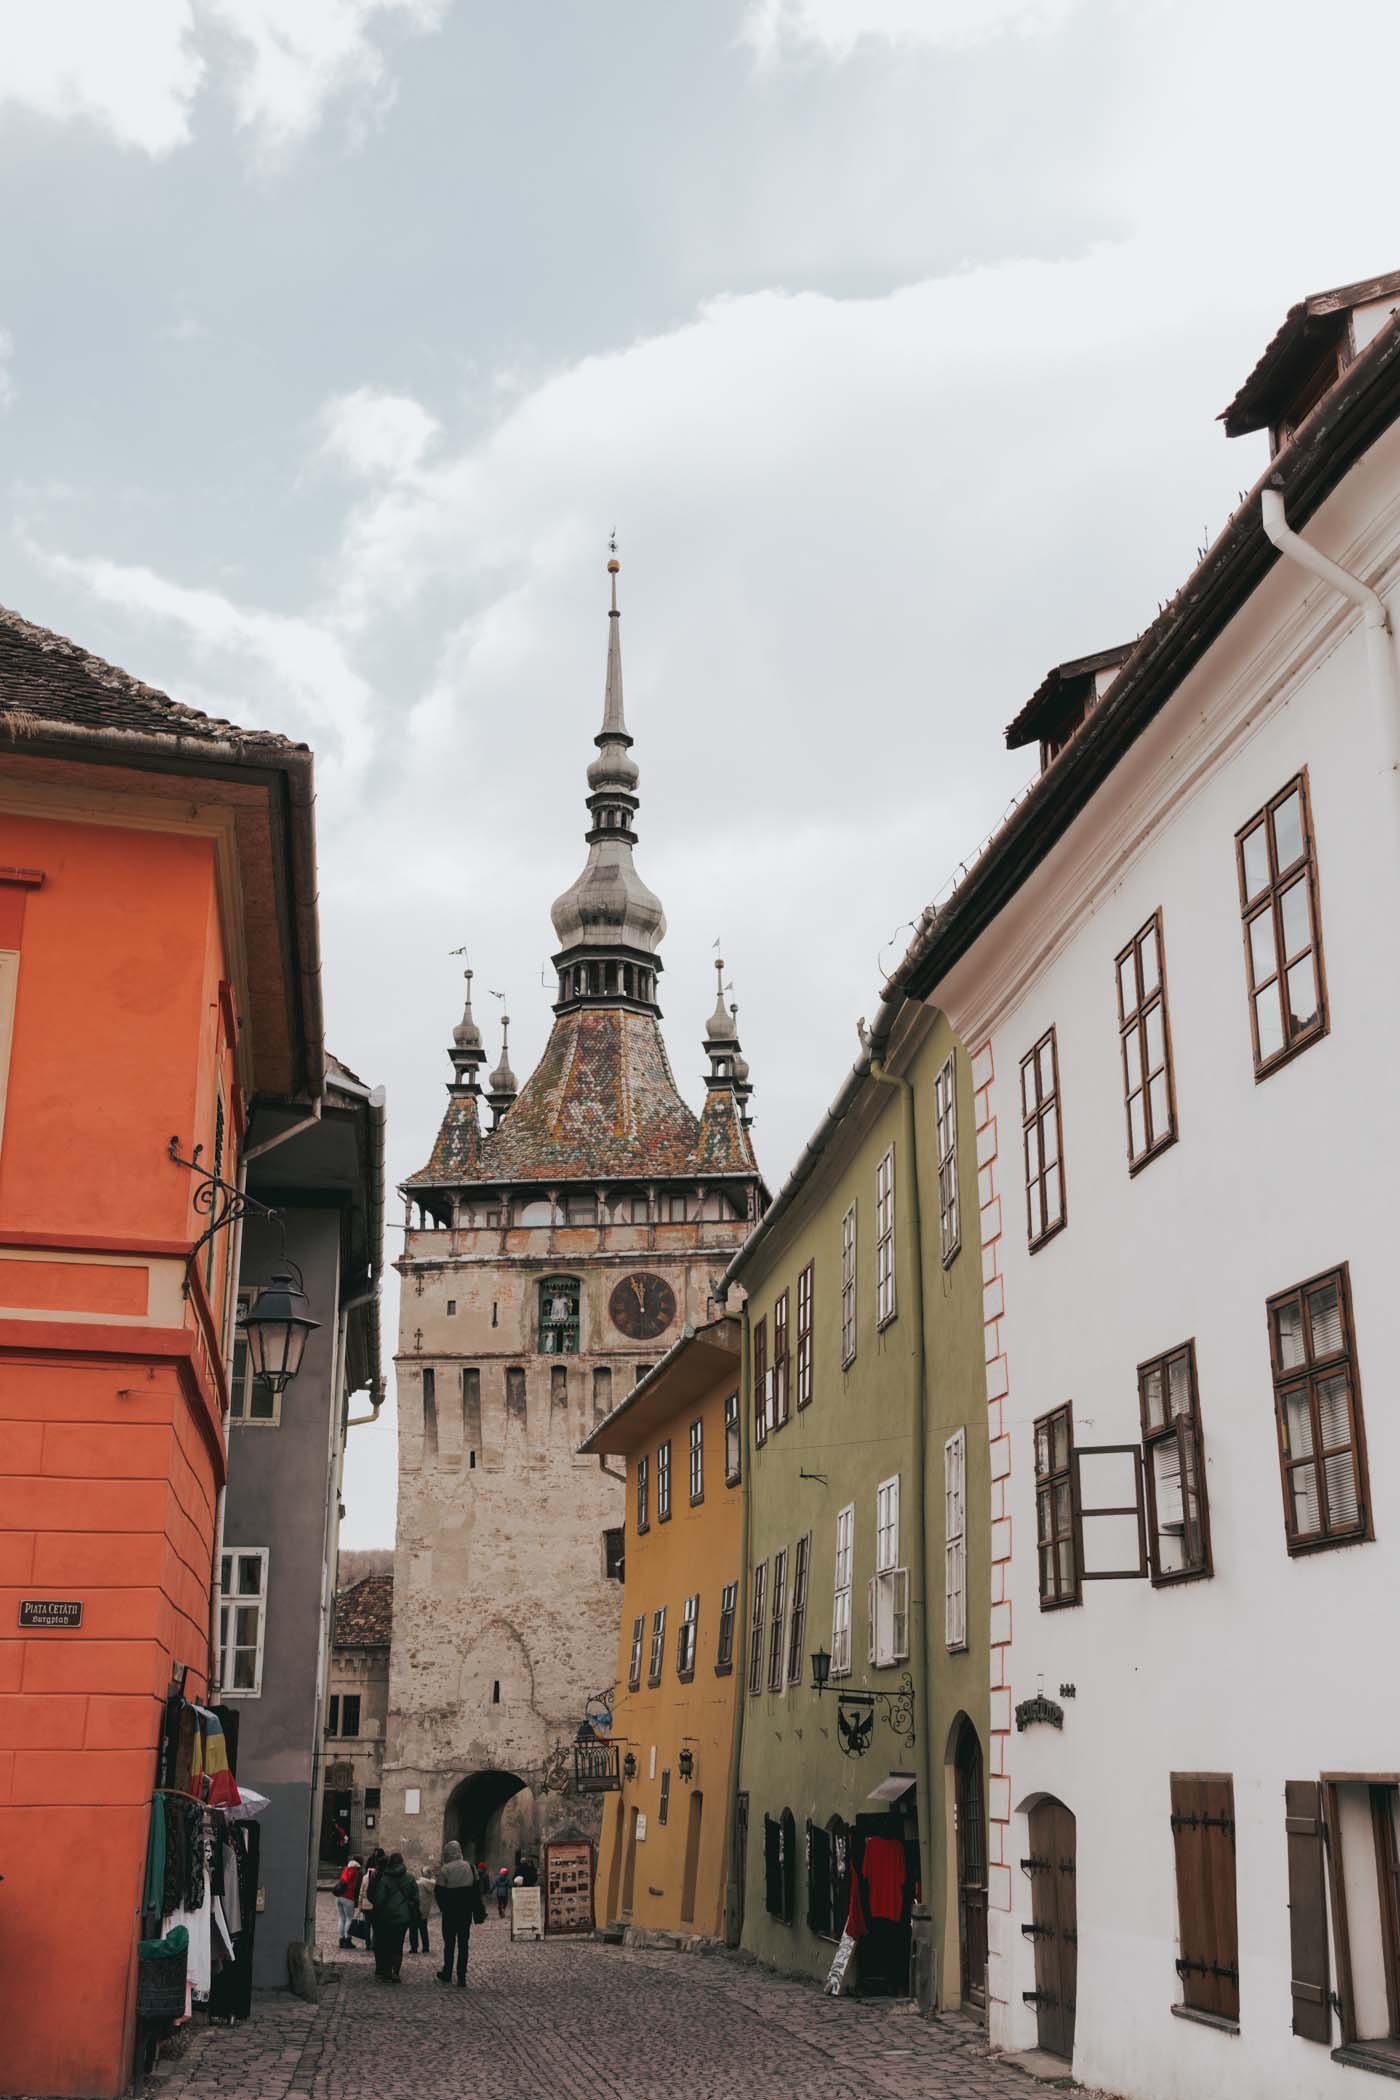 Sighisoara Day Trip Things to do in Romania on a Road Trip and places to visit Transylvania